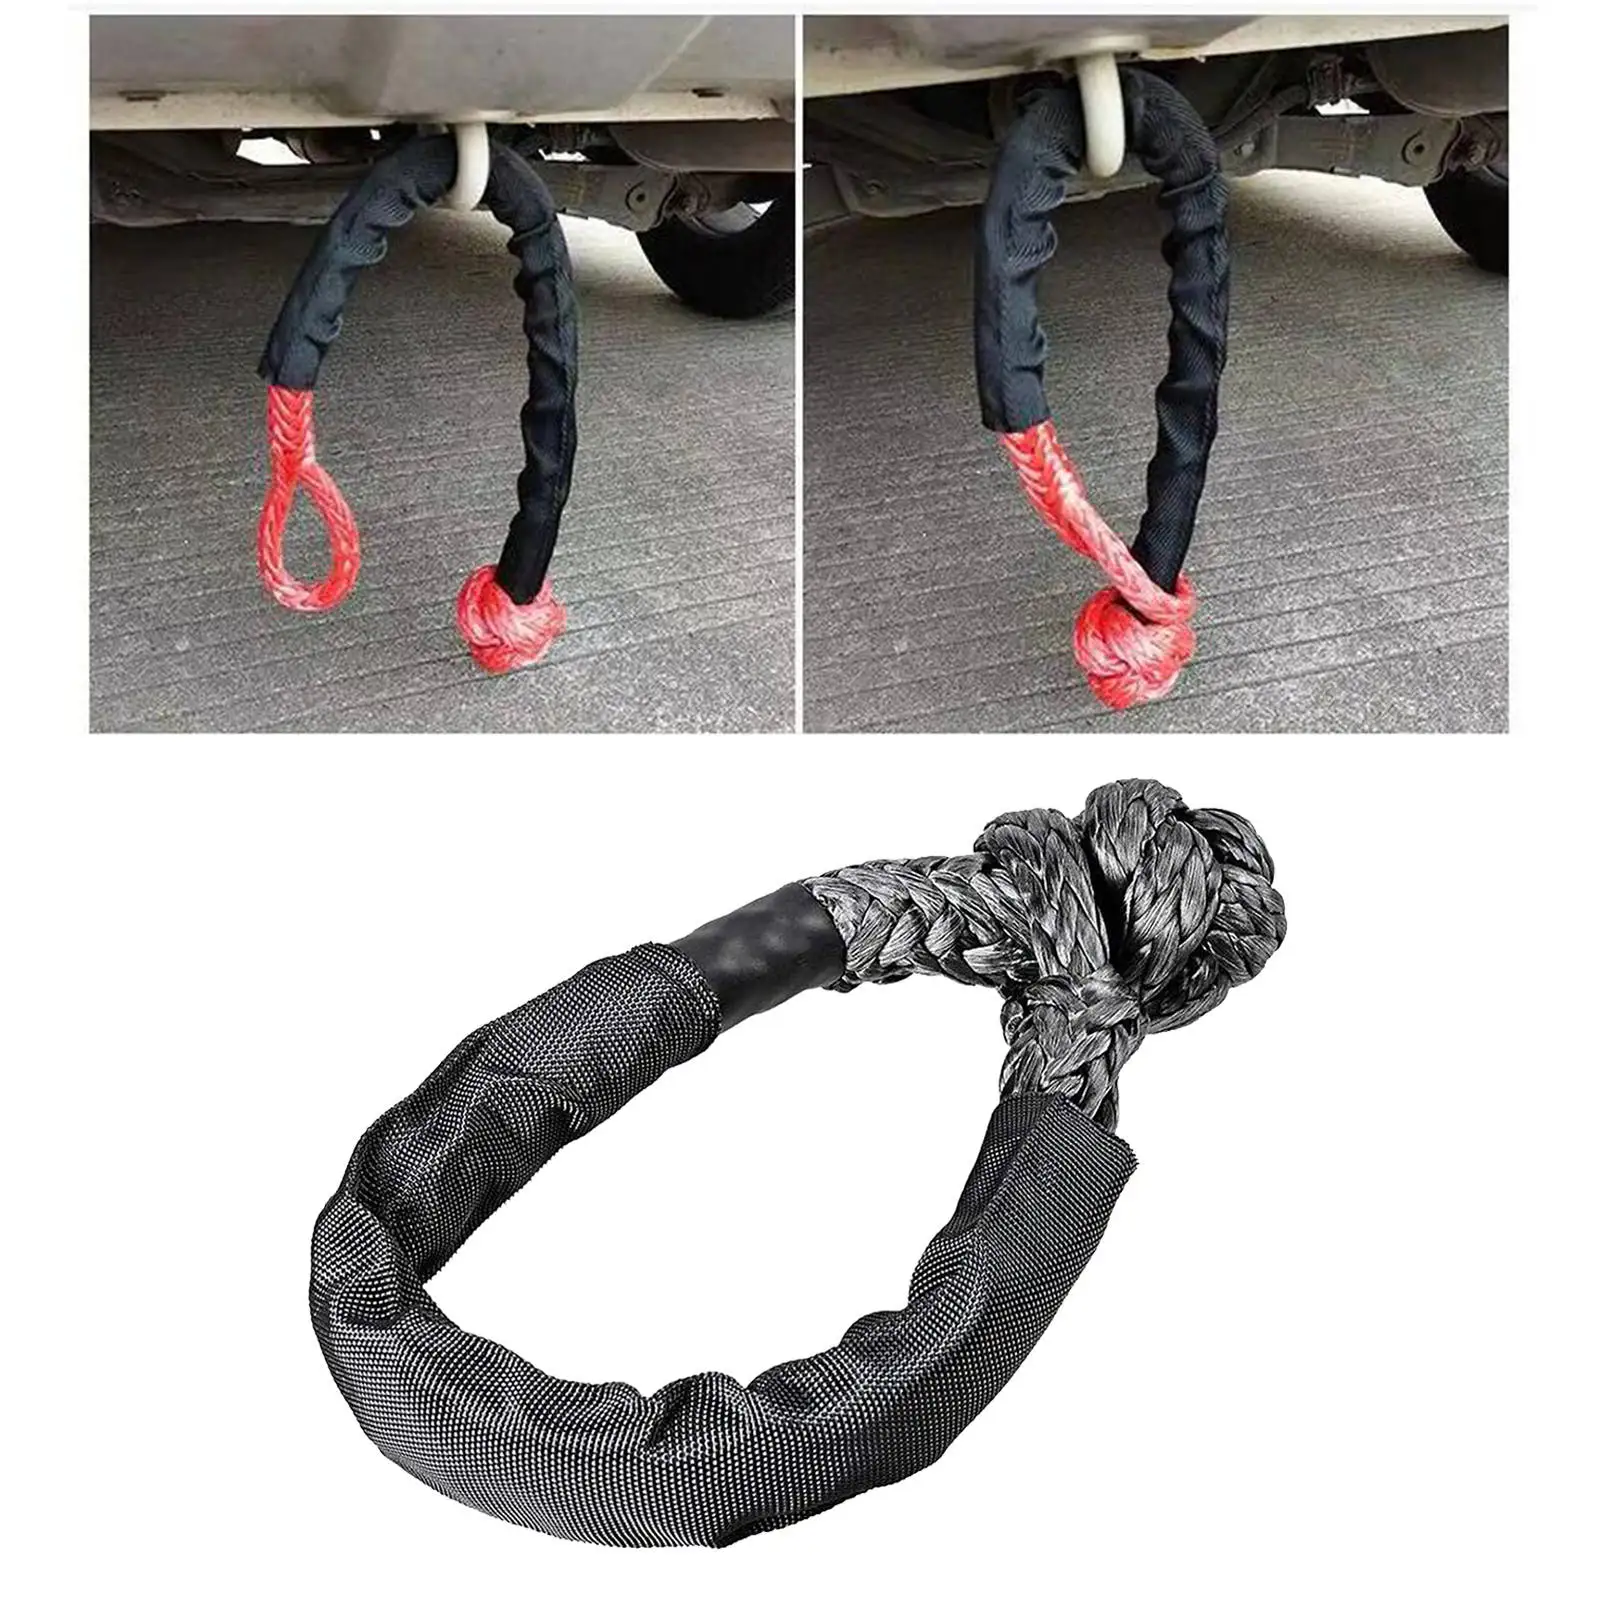 Break Strength Synthetic Soft Shackle Rugged Shackles with Protective Sleeve for Vehicle Recovery